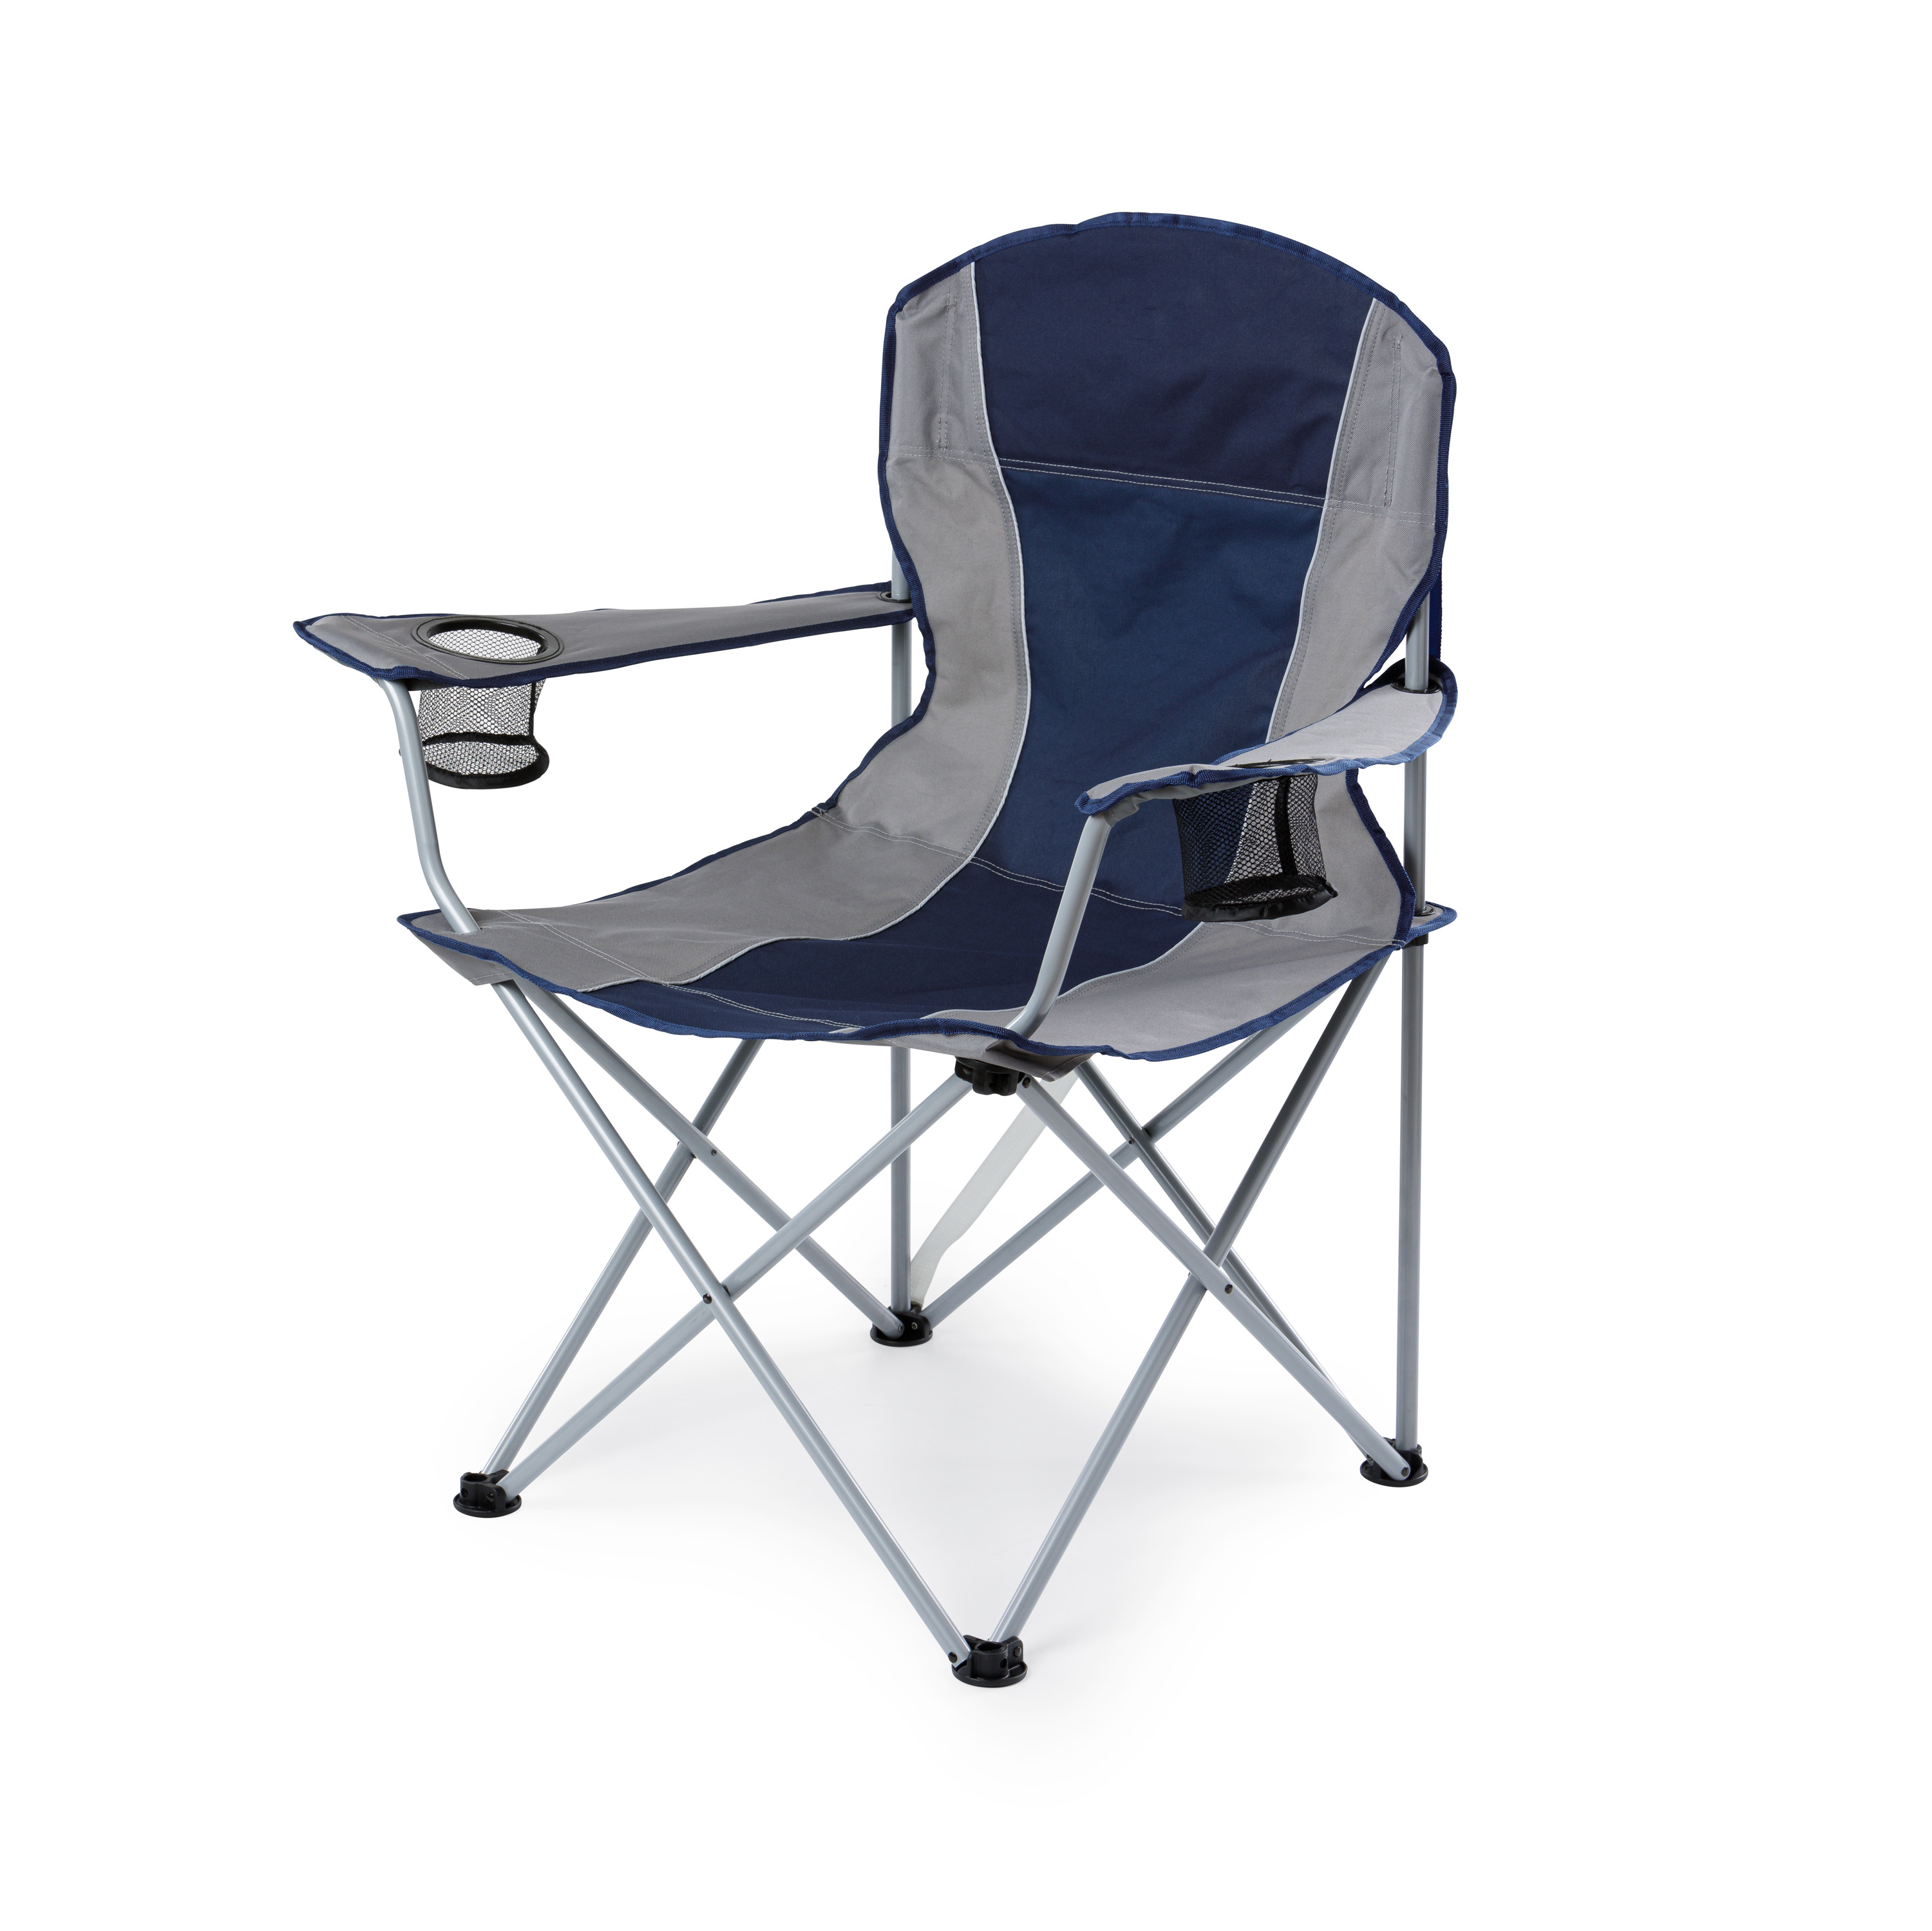 Ozark Trail Oversized Quad Camping Chair, Blue Cove - image 1 of 12